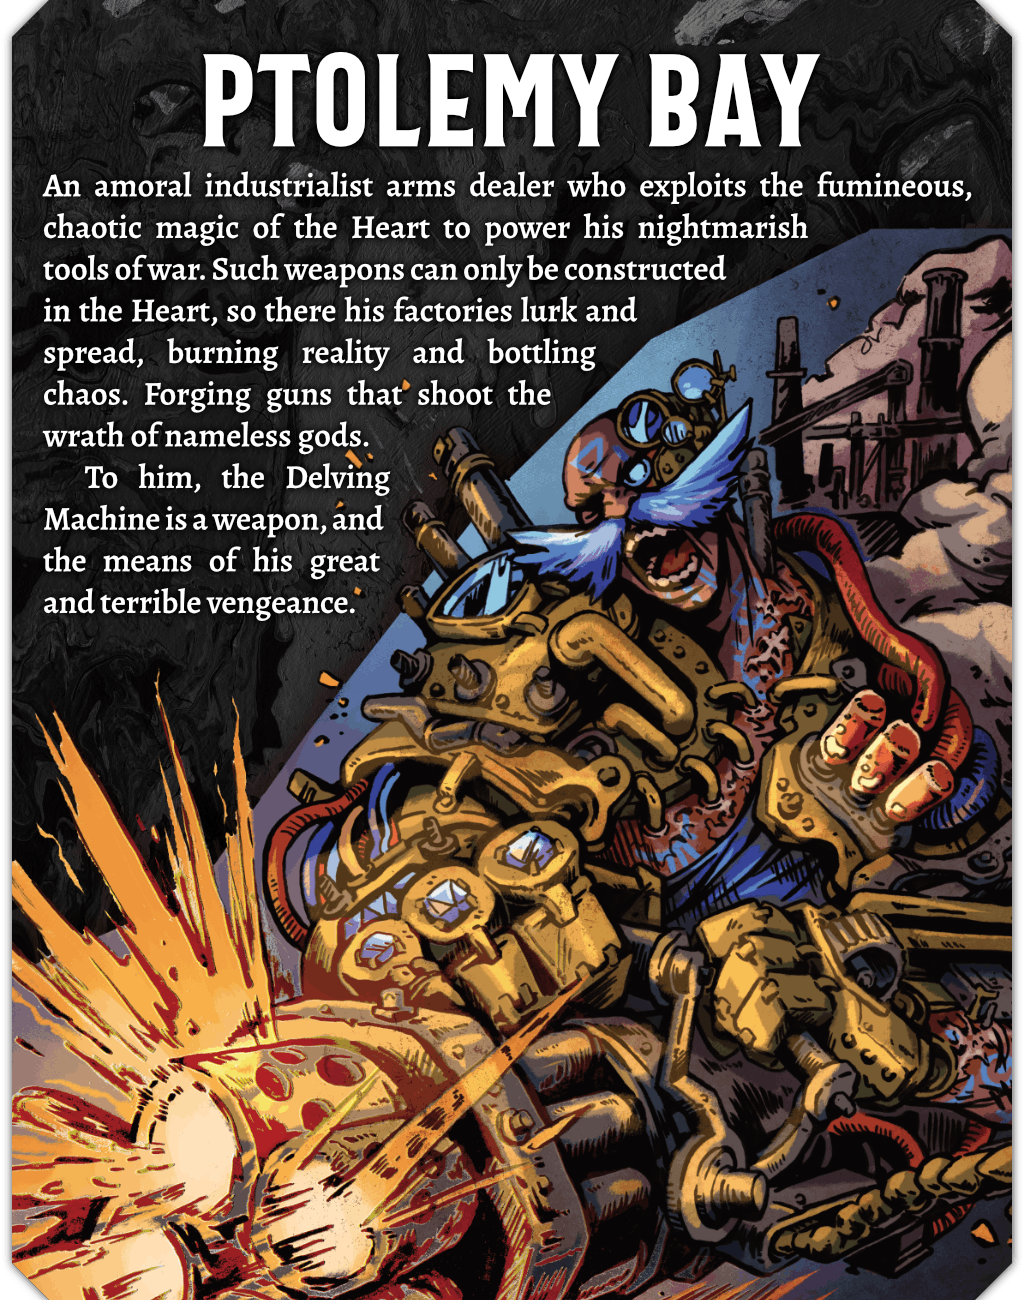 An illustration of Ptolemy Bay, a muscled human with a wild, bright blue moustache. He is augmented with brass machinery, including robotic 4 fingered hands, pipes, and pistons. He is firing a massive chaingun and screaming. Text on the image reads: An amoral industrialist arms dealer who exploits the fumineous, chaotic magic of the Heart to power his nightmarish tools of war. Such weapons can only be constructed in the Heart, so there his factories lurk and spread, burning reality and bottling chaos. Forging guns that shoot the wrath of nameless gods. To him, the Delving Machine is a weapon, and the means of his great and terrible vengeance. 